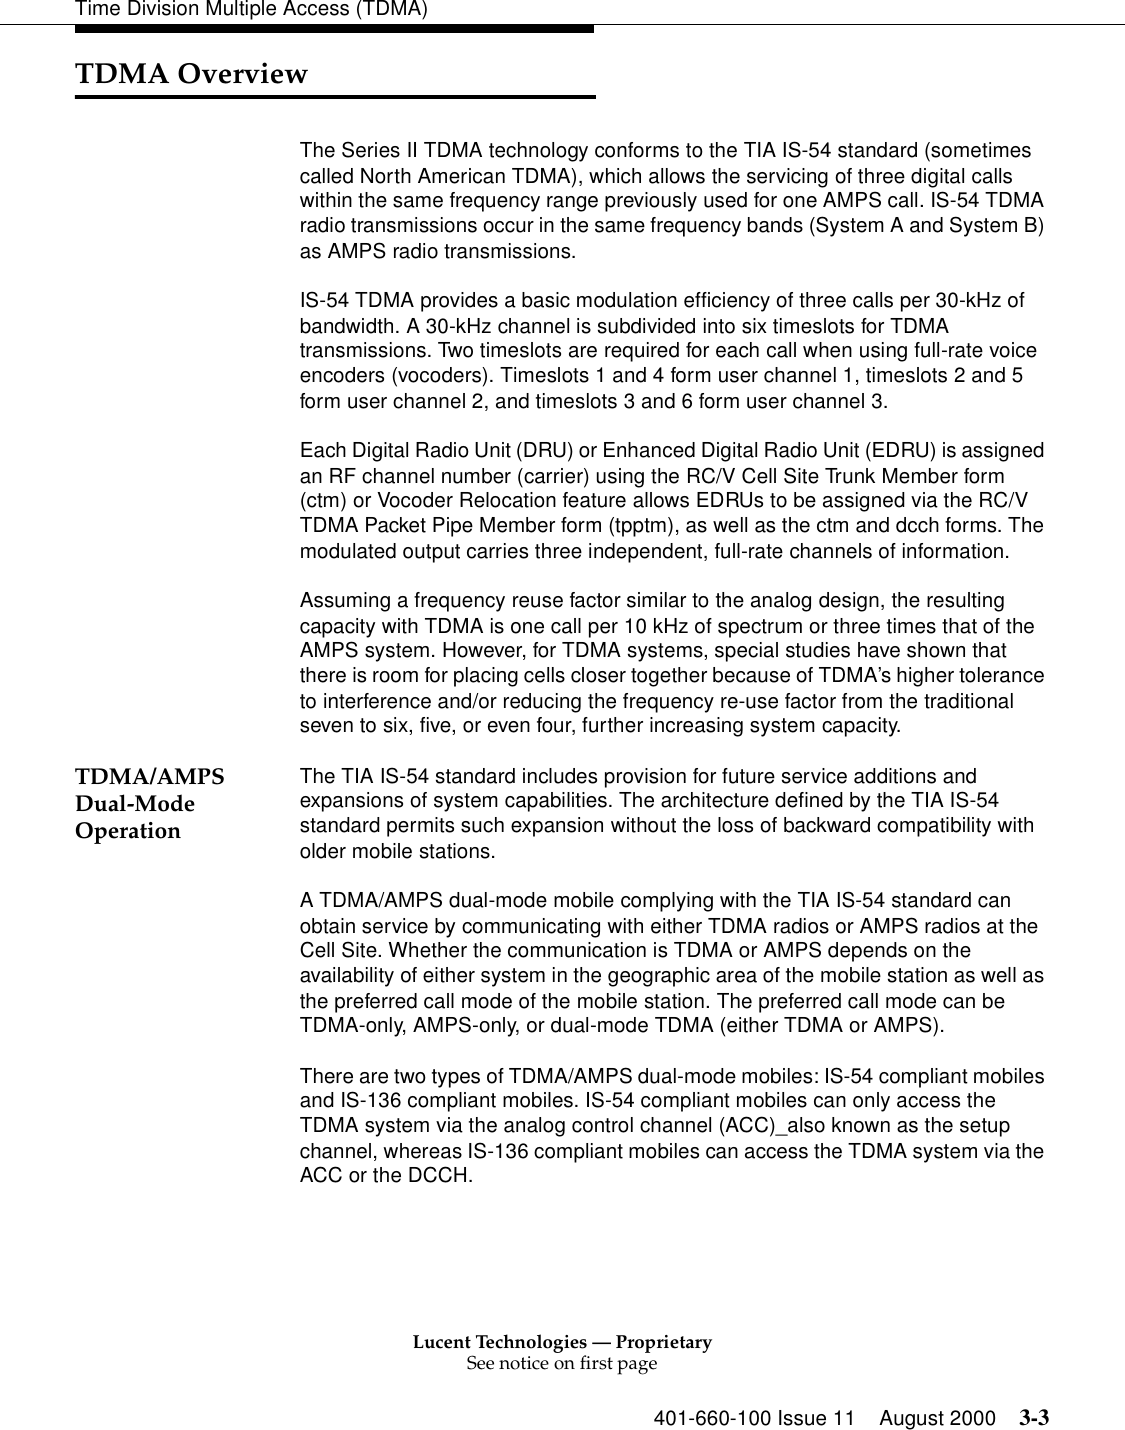 Lucent Technologies — ProprietarySee notice on first page401-660-100 Issue 11 August 2000 3-3Time Division Multiple Access (TDMA)TDMA OverviewThe Series II TDMA technology conforms to the TIA IS-54 standard (sometimes called North American TDMA), which allows the servicing of three digital calls within the same frequency range previously used for one AMPS call. IS-54 TDMA radio transmissions occur in the same frequency bands (System A and System B) as AMPS radio transmissions. IS-54 TDMA provides a basic modulation efficiency of three calls per 30-kHz of bandwidth. A 30-kHz channel is subdivided into six timeslots for TDMA transmissions. Two timeslots are required for each call when using full-rate voice encoders (vocoders). Timeslots 1 and 4 form user channel 1, timeslots 2 and 5 form user channel 2, and timeslots 3 and 6 form user channel 3.Each Digital Radio Unit (DRU) or Enhanced Digital Radio Unit (EDRU) is assigned an RF channel number (carrier) using the RC/V Cell Site Trunk Member form (ctm) or Vocoder Relocation feature allows EDRUs to be assigned via the RC/V TDMA Packet Pipe Member form (tpptm), as well as the ctm and dcch forms. The modulated output carries three independent, full-rate channels of information. Assuming a frequency reuse factor similar to the analog design, the resulting capacity with TDMA is one call per 10 kHz of spectrum or three times that of the AMPS system. However, for TDMA systems, special studies have shown that there is room for placing cells closer together because of TDMA’s higher tolerance to interference and/or reducing the frequency re-use factor from the traditional seven to six, five, or even four, further increasing system capacity. TDMA/AMPS Dual-Mode OperationThe TIA IS-54 standard includes provision for future service additions and expansions of system capabilities. The architecture defined by the TIA IS-54 standard permits such expansion without the loss of backward compatibility with older mobile stations. A TDMA/AMPS dual-mode mobile complying with the TIA IS-54 standard can obtain service by communicating with either TDMA radios or AMPS radios at the Cell Site. Whether the communication is TDMA or AMPS depends on the availability of either system in the geographic area of the mobile station as well as the preferred call mode of the mobile station. The preferred call mode can be TDMA-only, AMPS-only, or dual-mode TDMA (either TDMA or AMPS). There are two types of TDMA/AMPS dual-mode mobiles: IS-54 compliant mobiles and IS-136 compliant mobiles. IS-54 compliant mobiles can only access the TDMA system via the analog control channel (ACC)_also known as the setup channel, whereas IS-136 compliant mobiles can access the TDMA system via the ACC or the DCCH. 